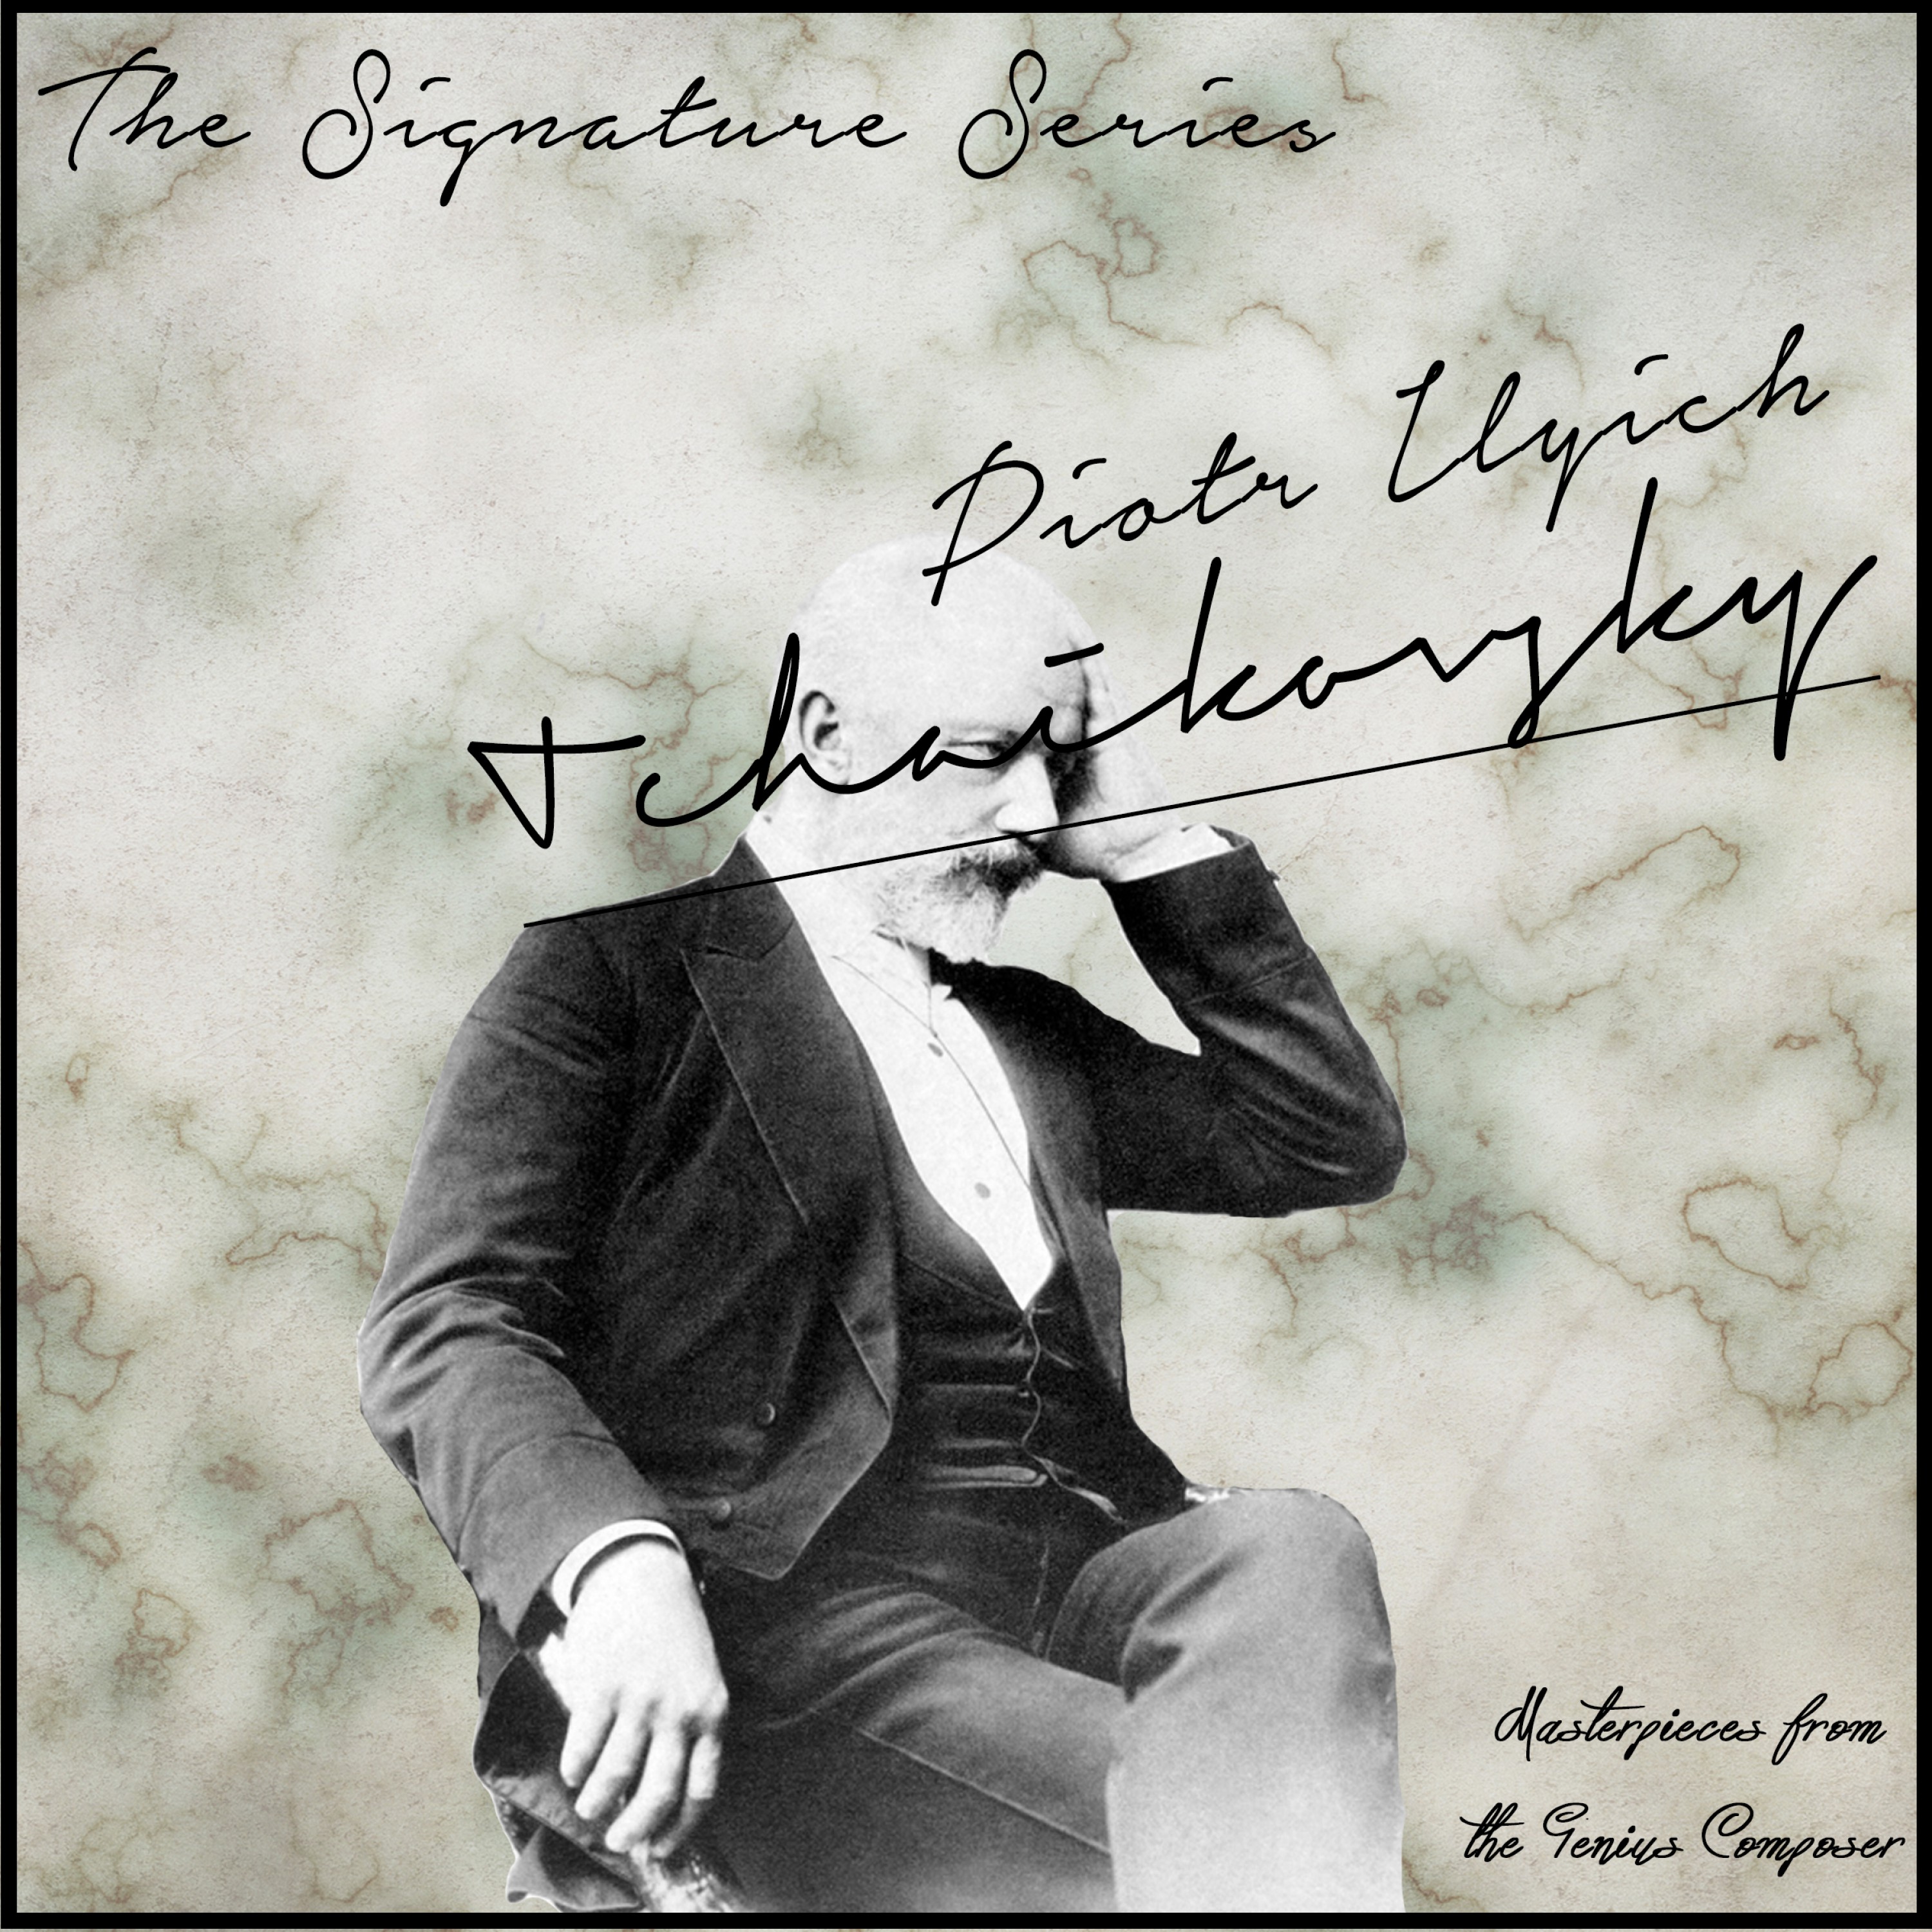 The Signature Series: Piotr Ilyich Tchaikovsky (Masterpieces from the Genius Composer)